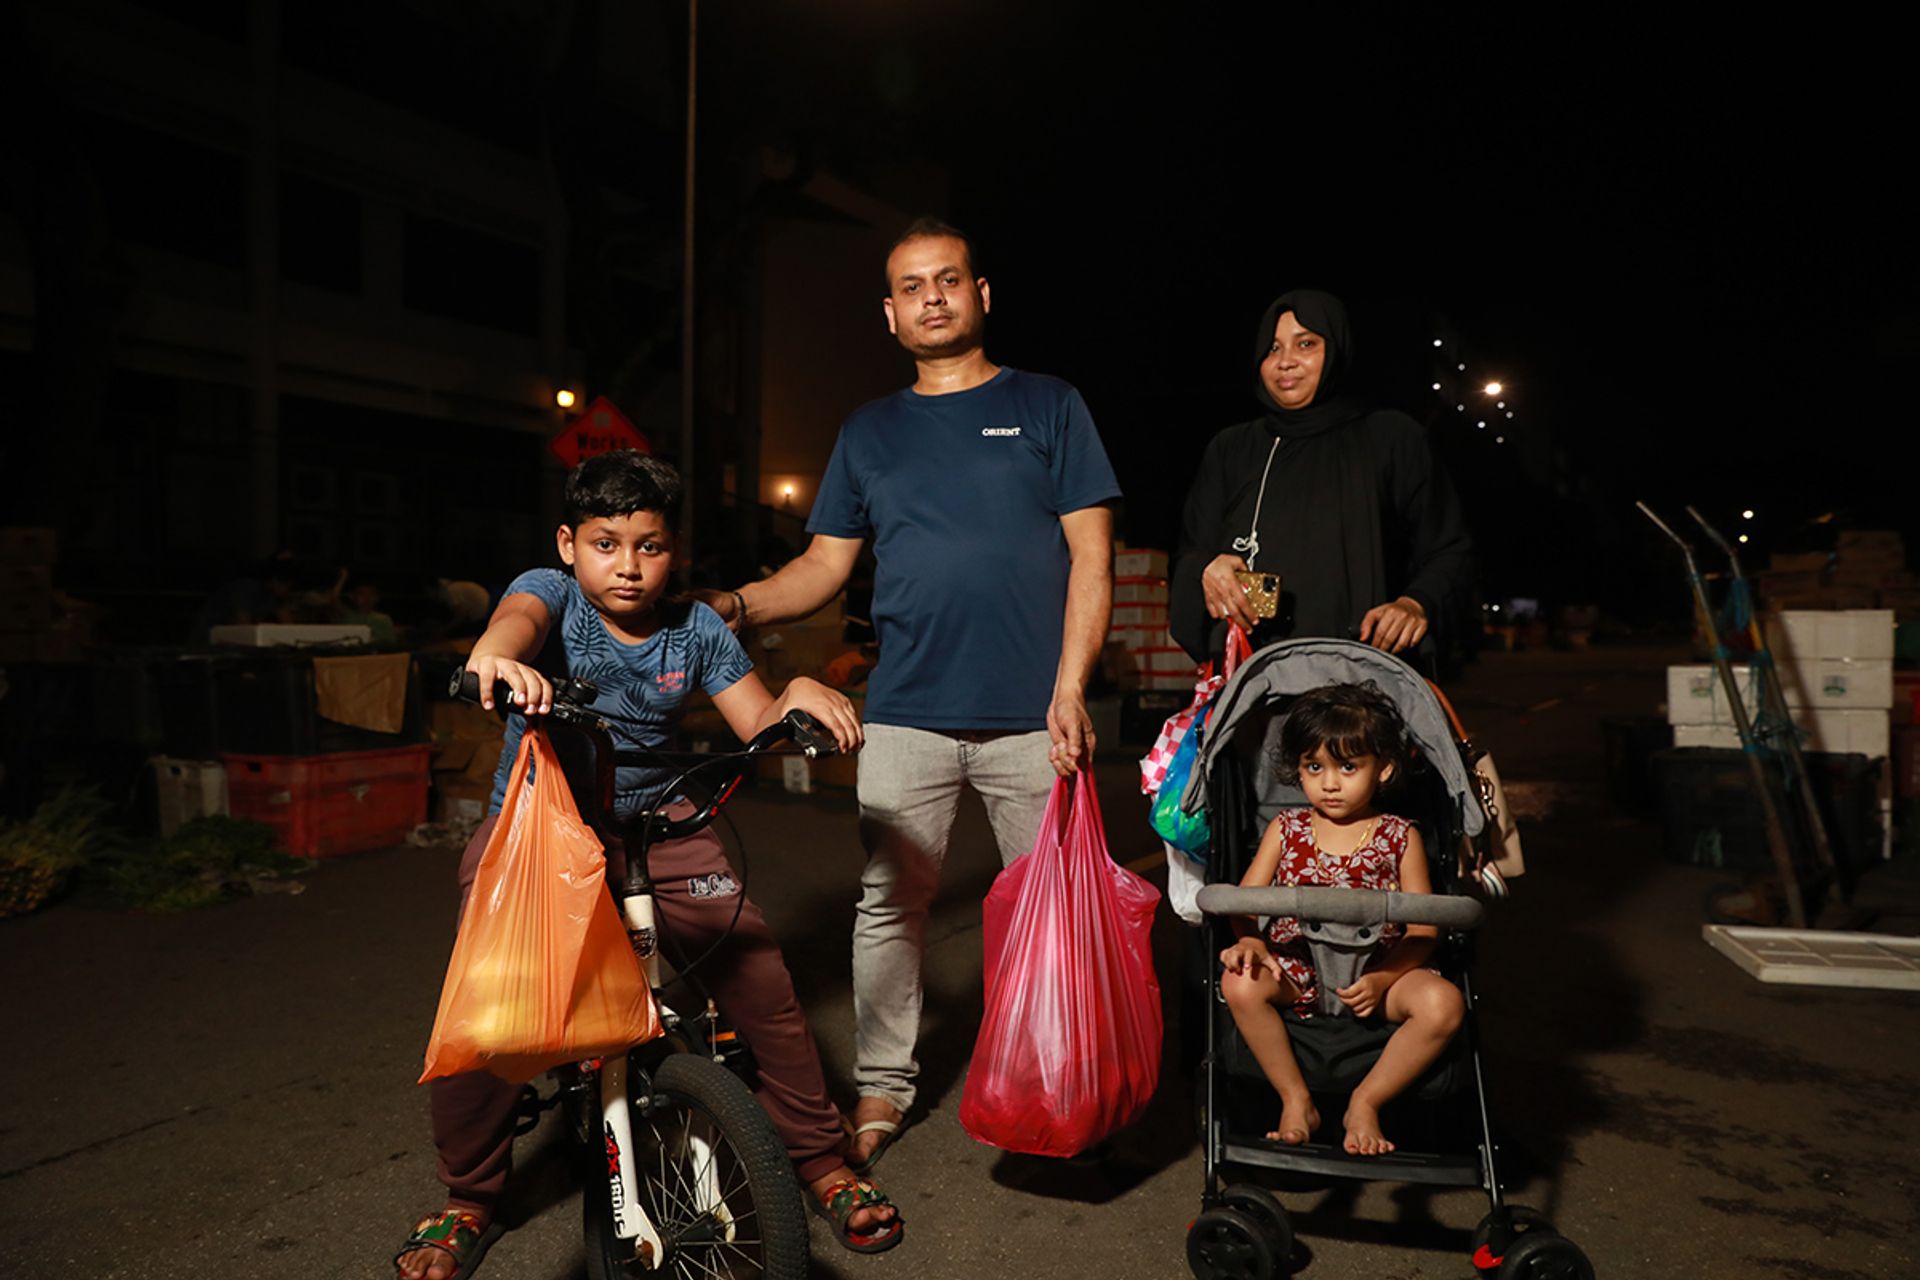 Marketing manager Musa and his family – (from left) son Ibnul Imran Sarkar, 8, his wife Poly Akt, 32, and daughter Sumaiya Akter Moriyam, 3 – live in nearby Kim Keat.